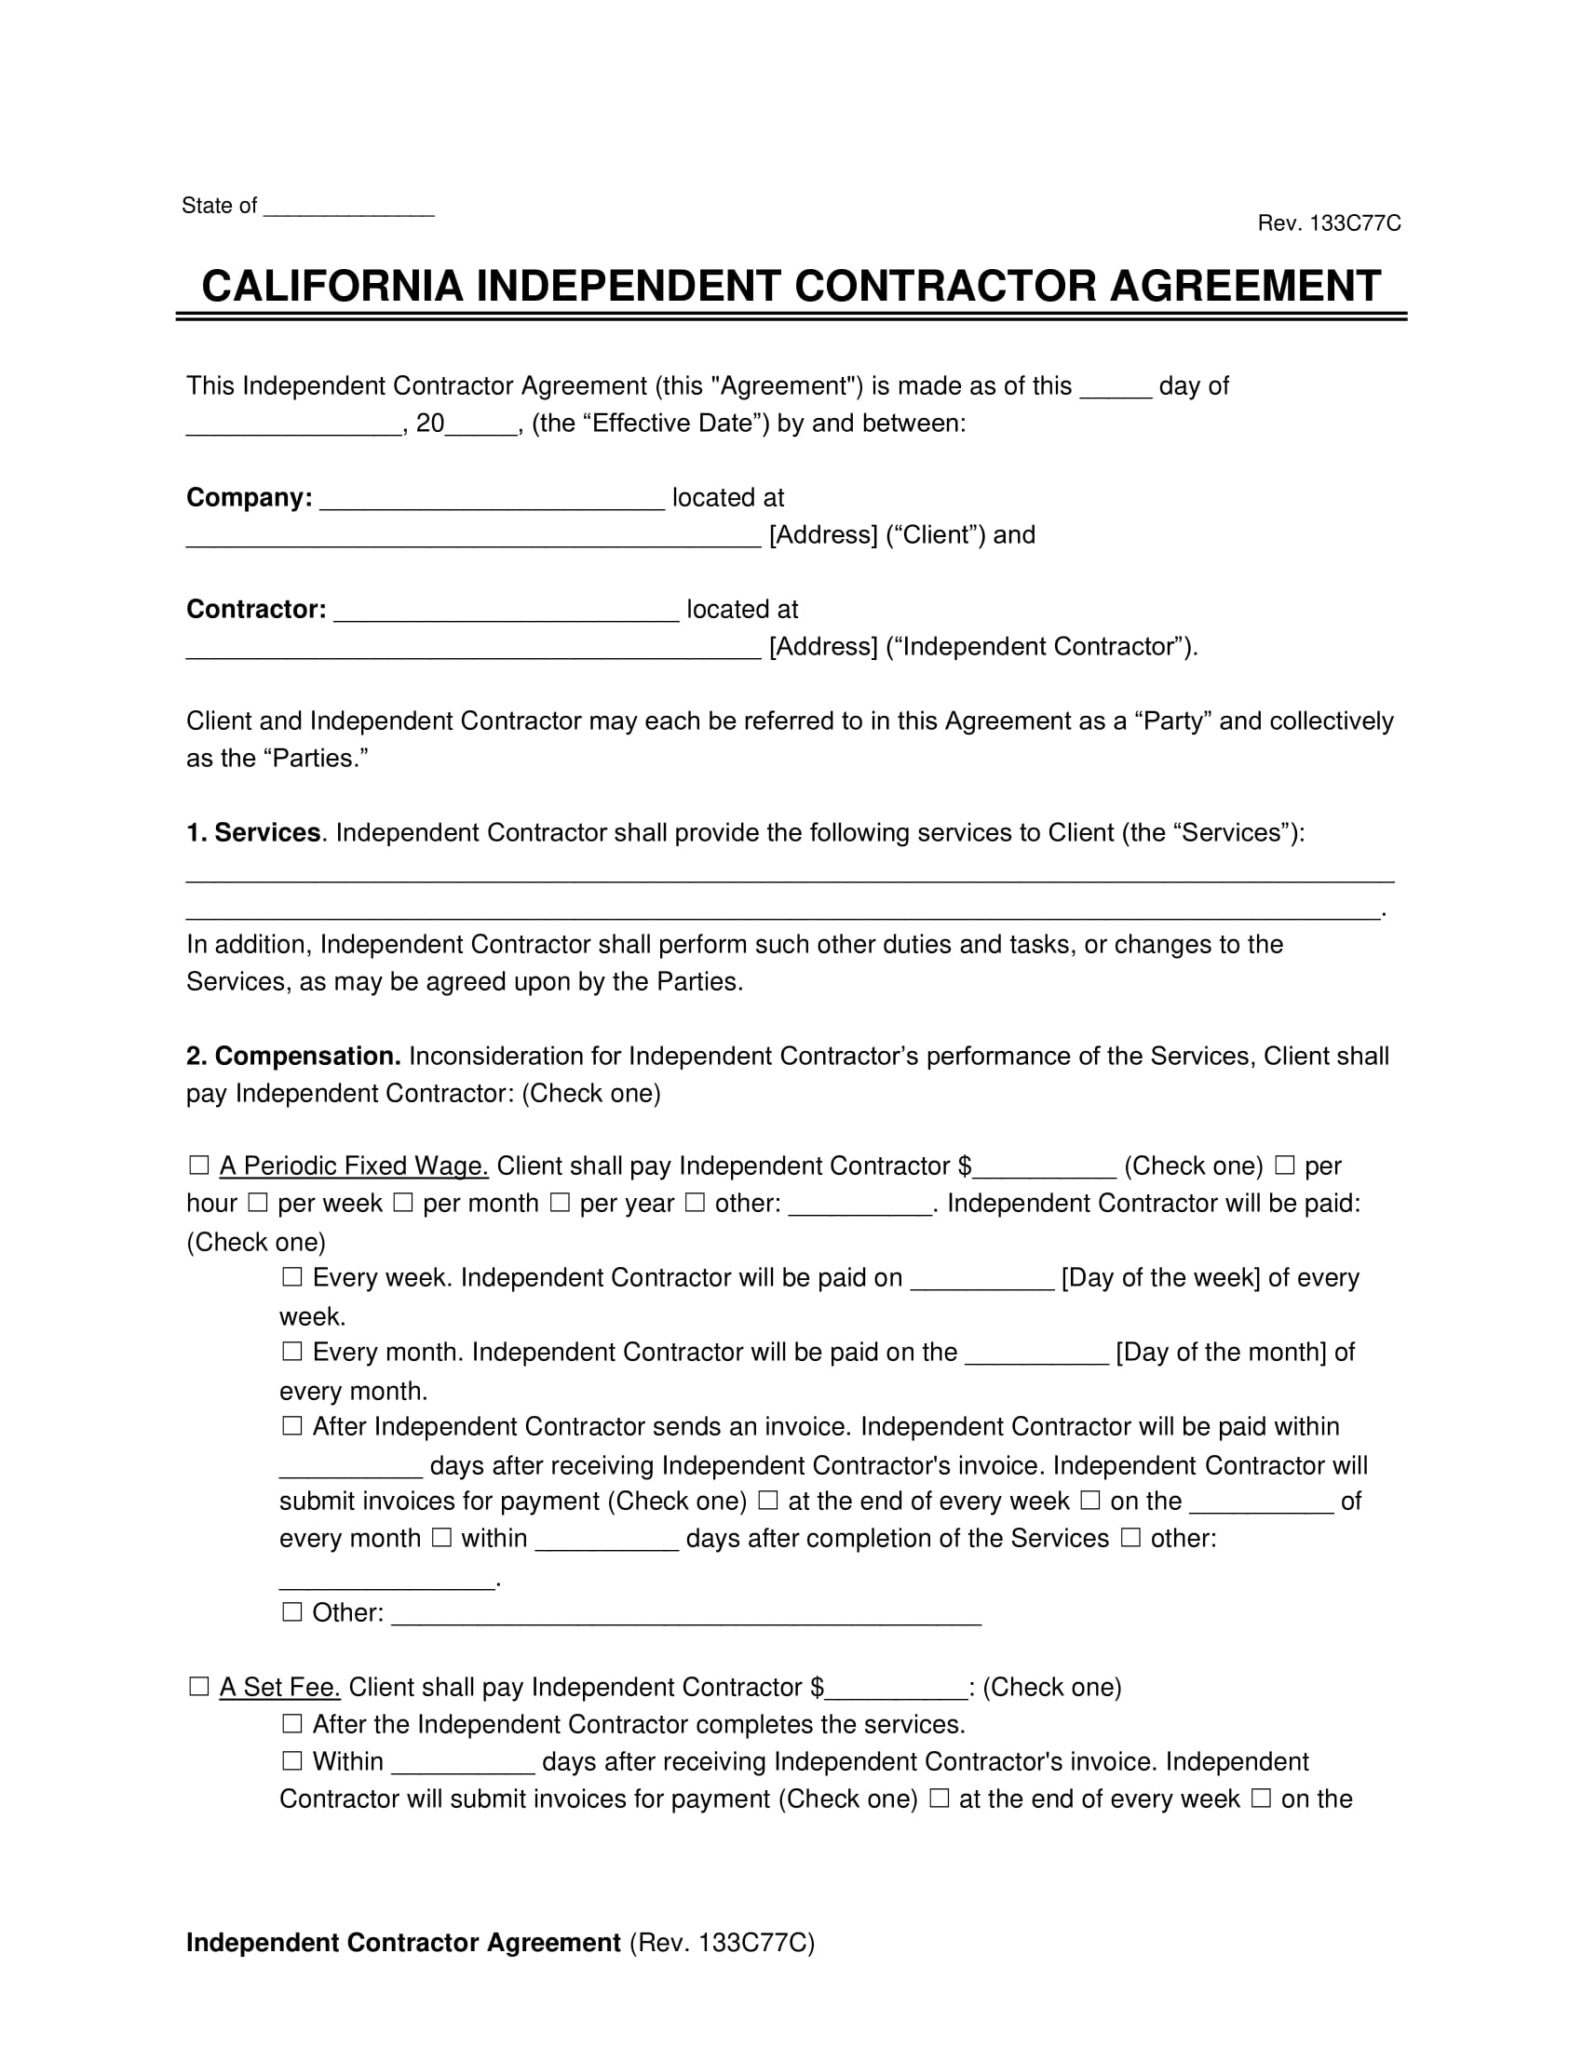 free-california-independent-contractor-agreement-template